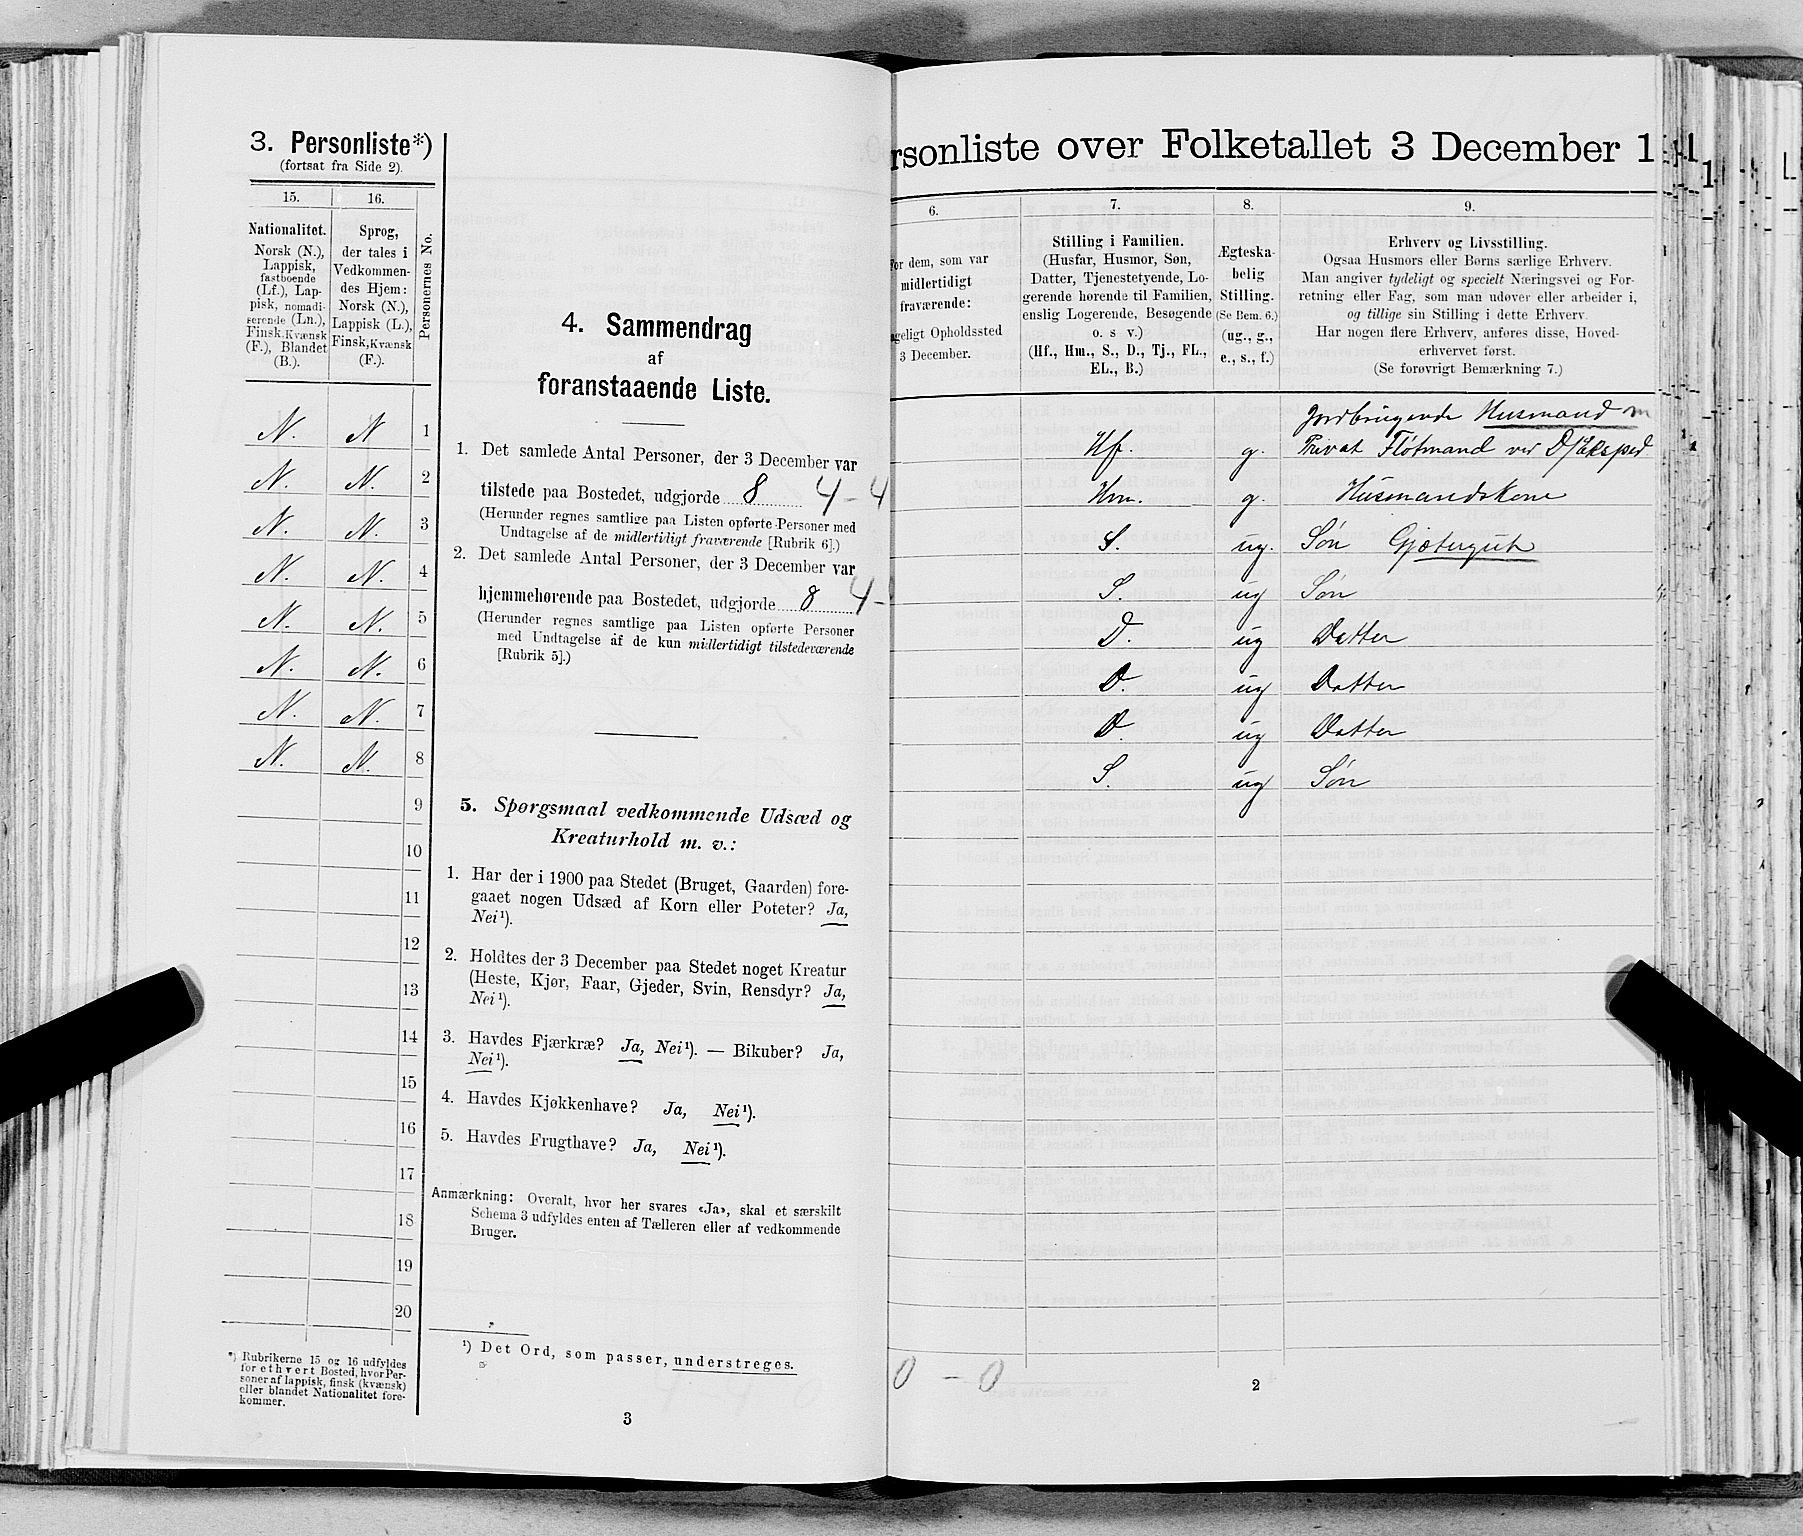 SAT, 1900 census for Mo, 1900, p. 181